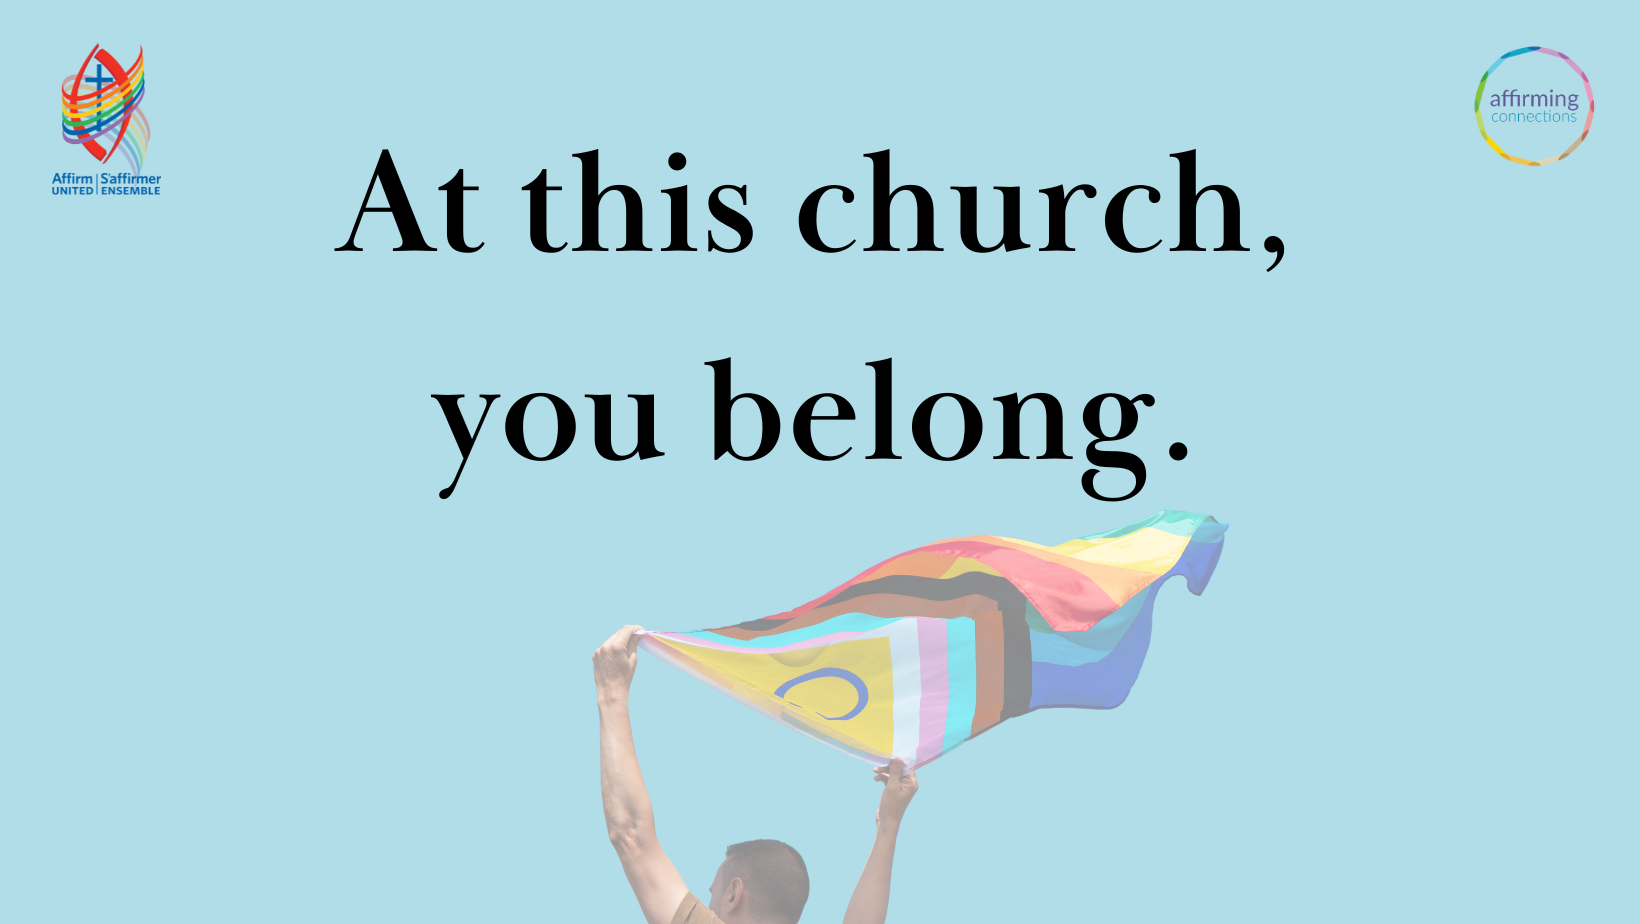 stand with members of the LGBTQ2 members of the congregation and the community at large